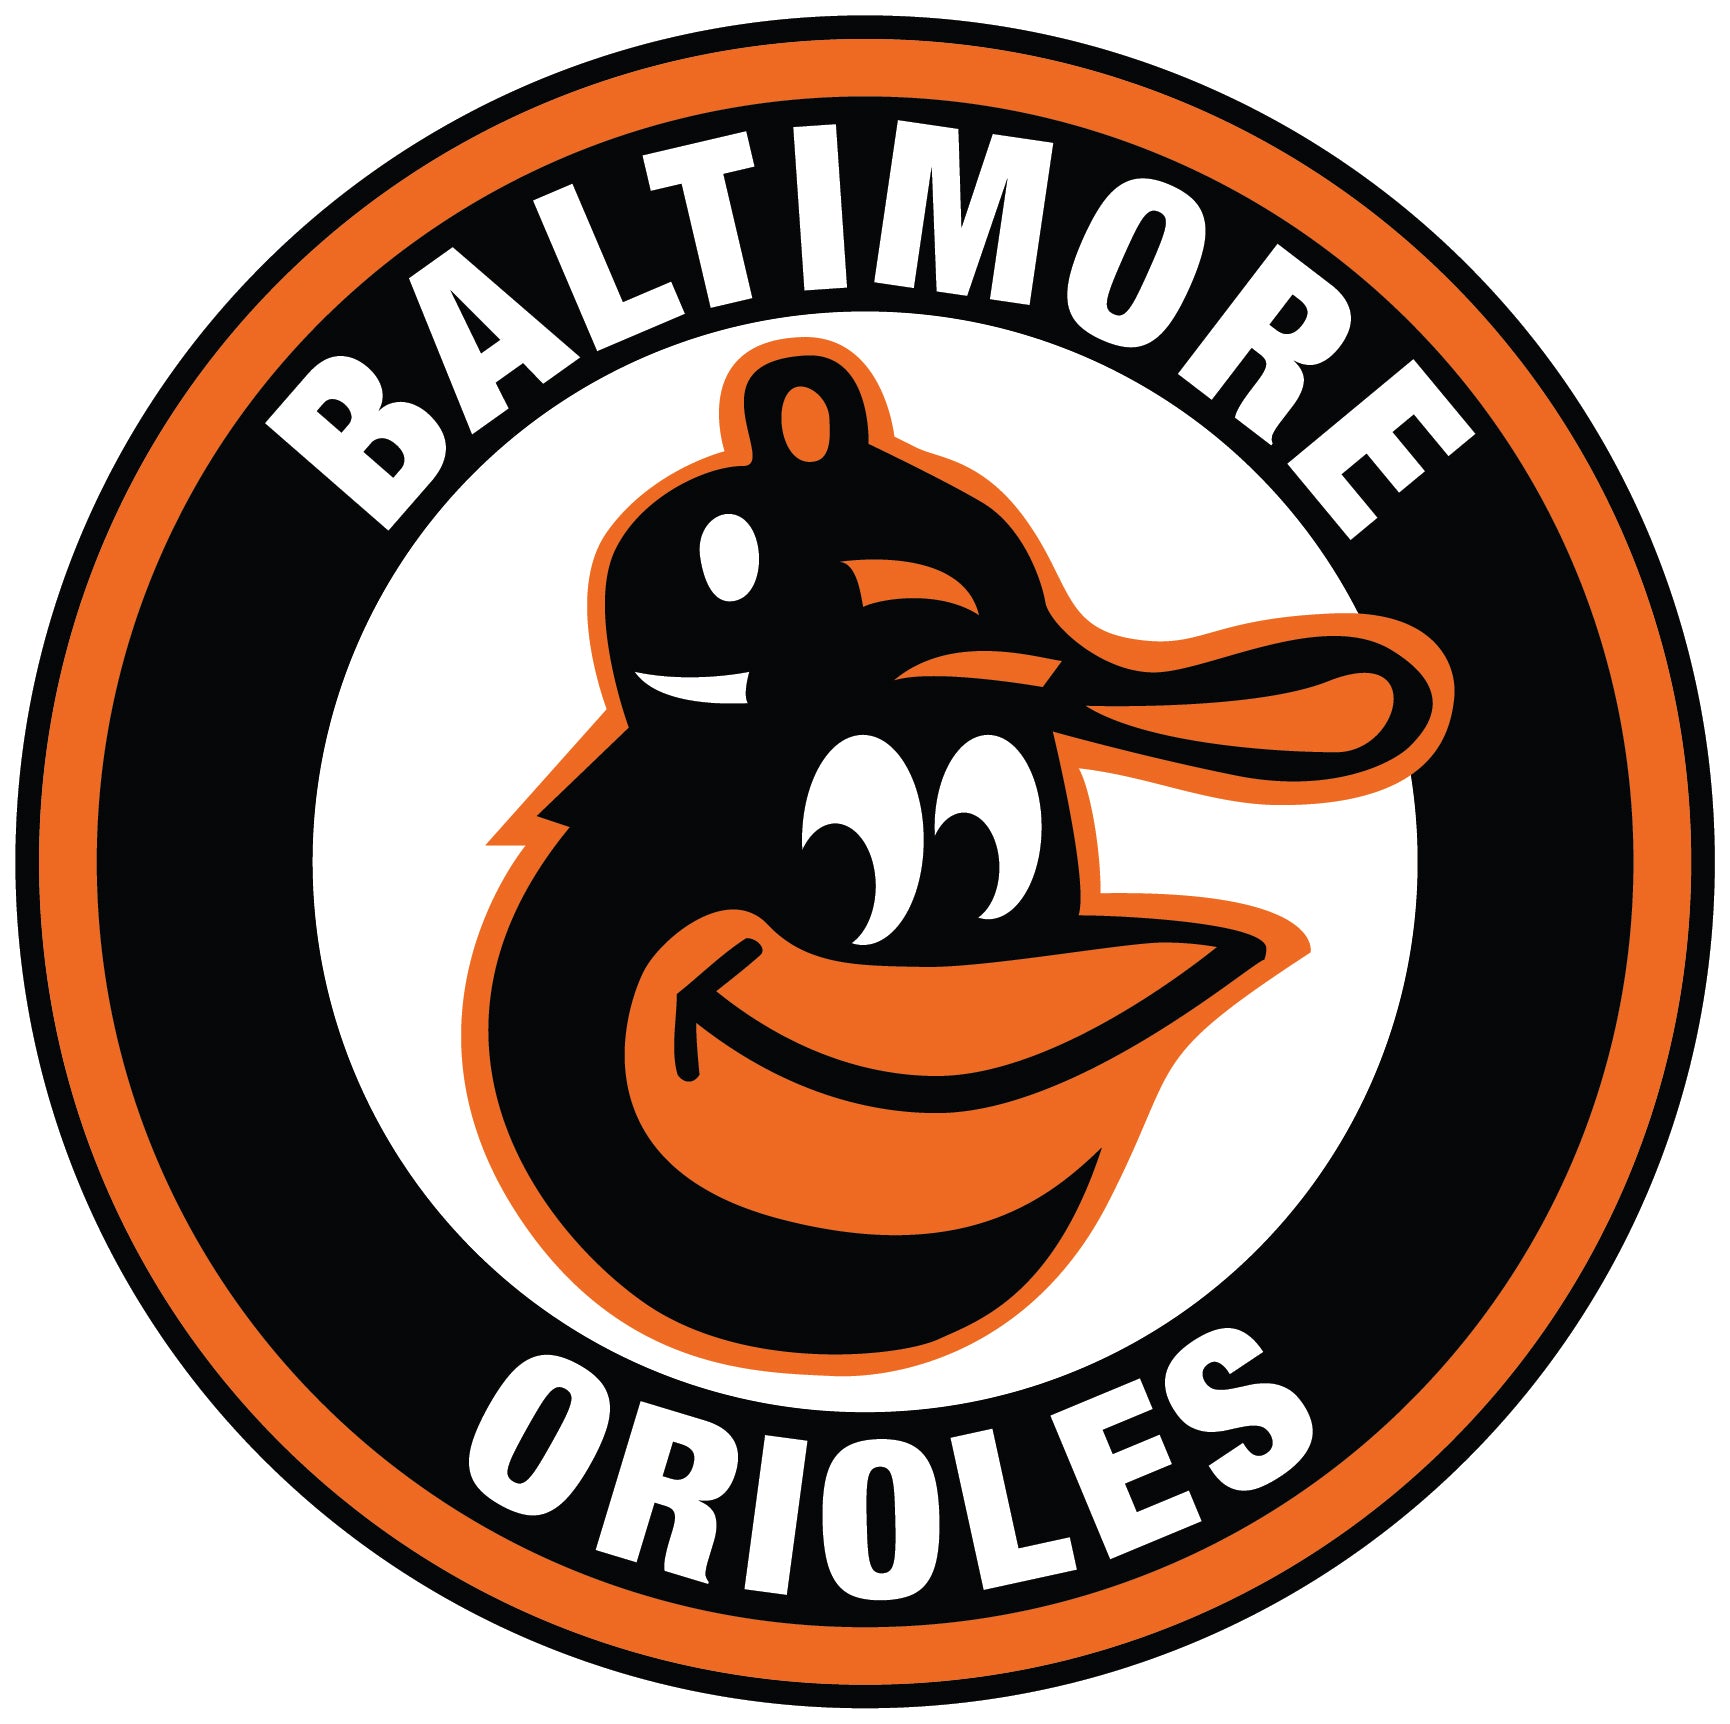 2022 Baltimore Orioles Morale Has Definitely Improved, Now In the